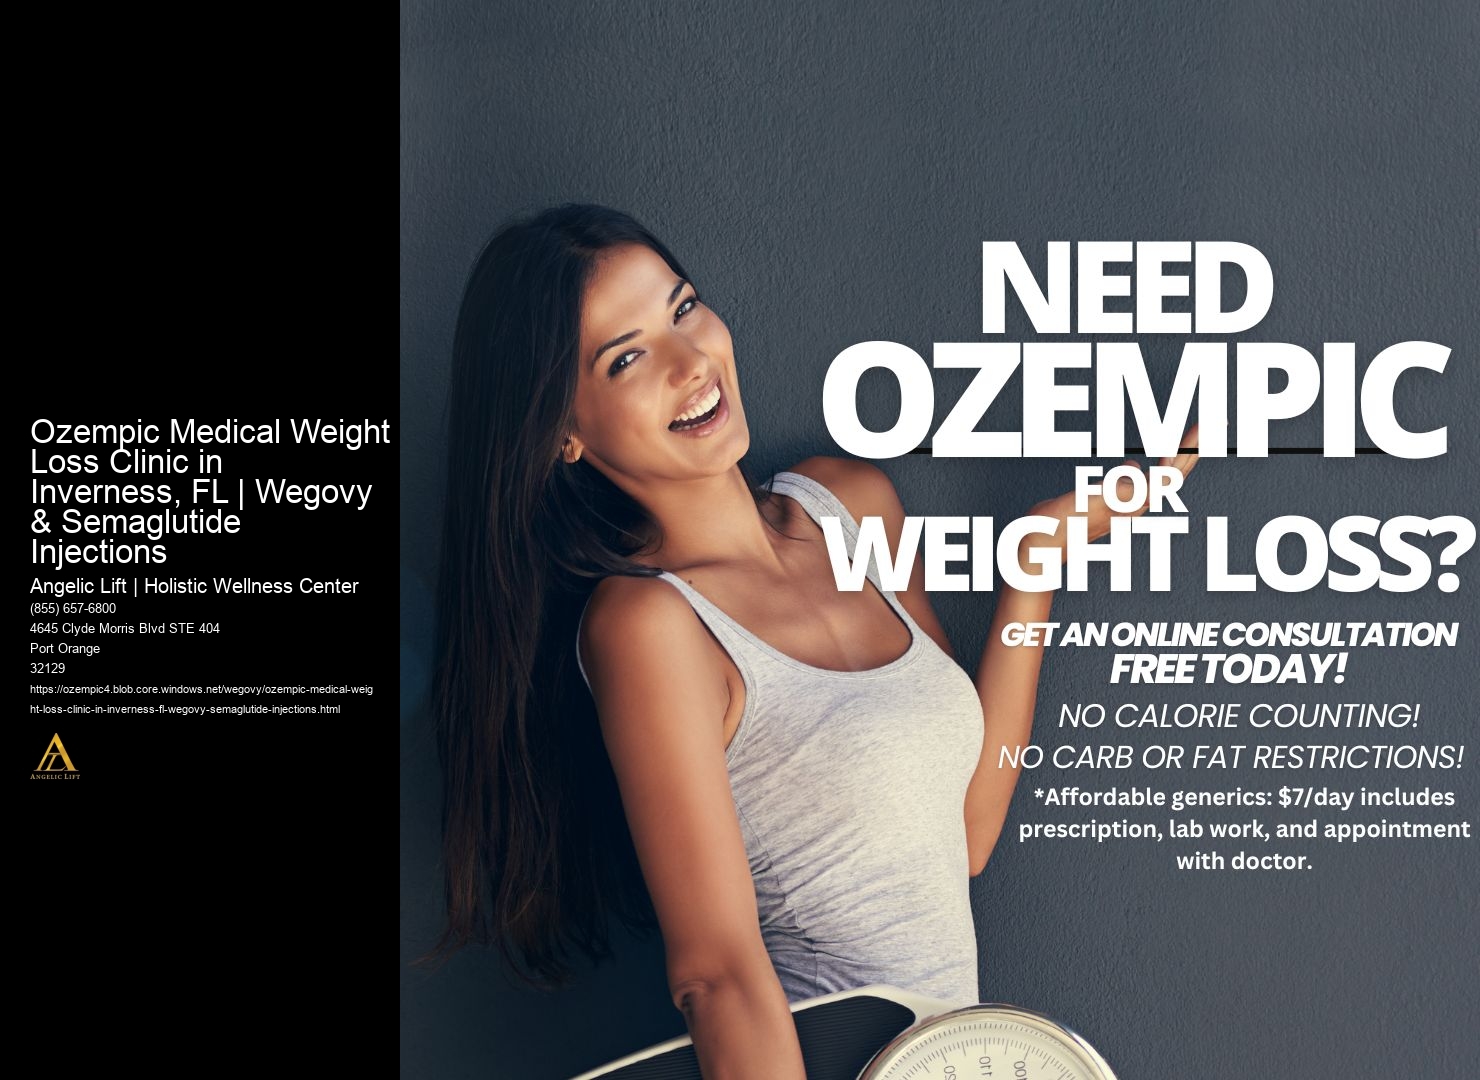 Ozempic Medical Weight Loss Clinic in Inverness, FL | Wegovy & Semaglutide Injections